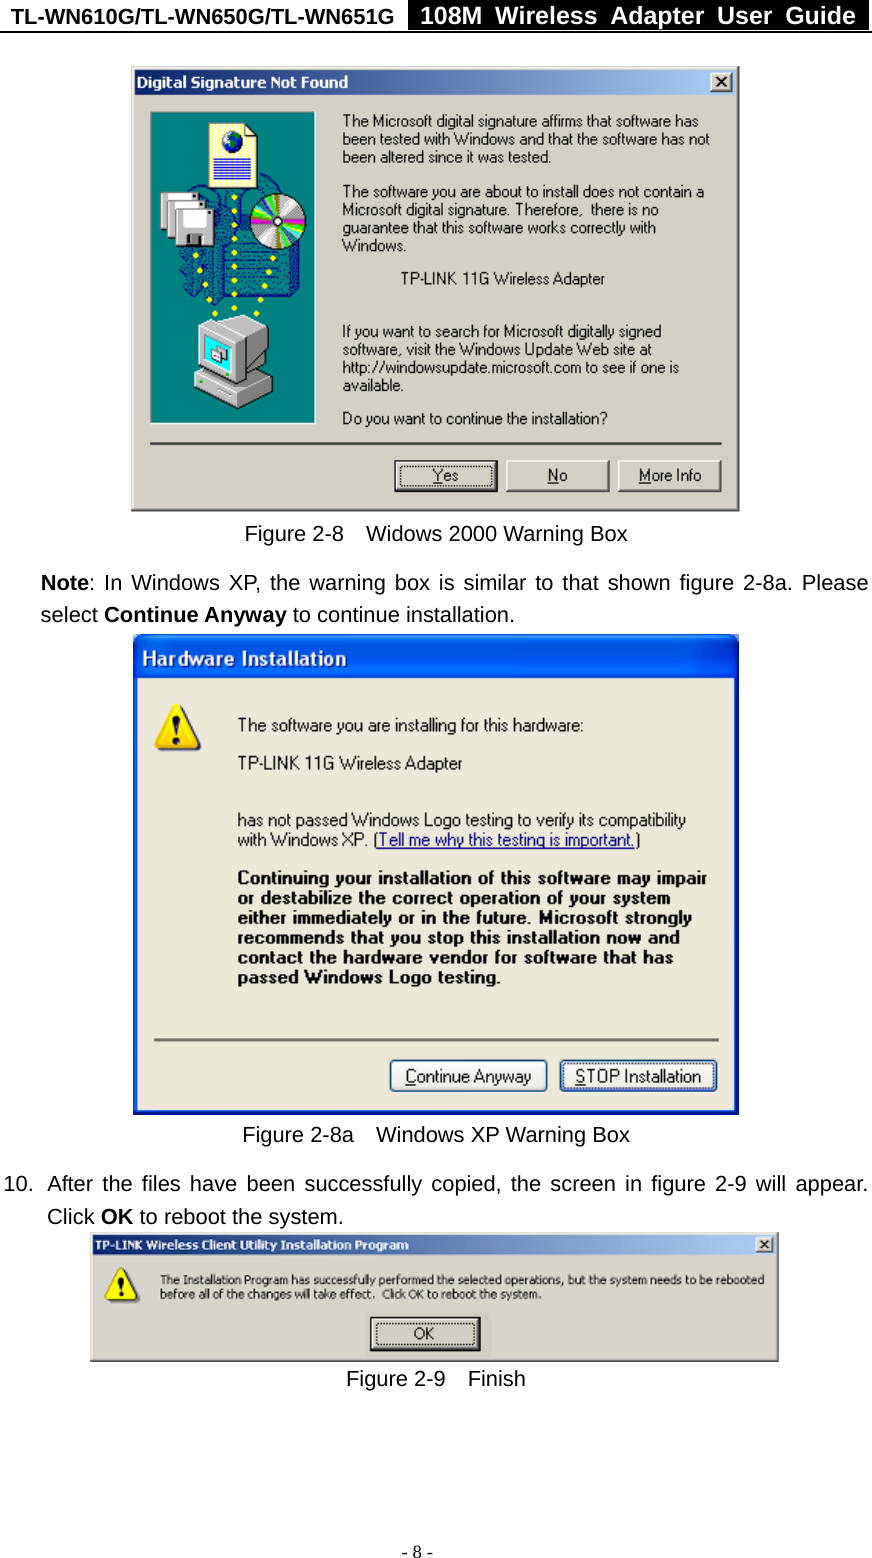 TL-WN610G/TL-WN650G/TL-WN651G  108M Wireless Adapter User Guide  - 8 -  Figure 2-8    Widows 2000 Warning Box Note: In Windows XP, the warning box is similar to that shown figure 2-8a. Please select Continue Anyway to continue installation.  Figure 2-8a    Windows XP Warning Box 10.  After the files have been successfully copied, the screen in figure 2-9 will appear. Click OK to reboot the system.  Figure 2-9  Finish 